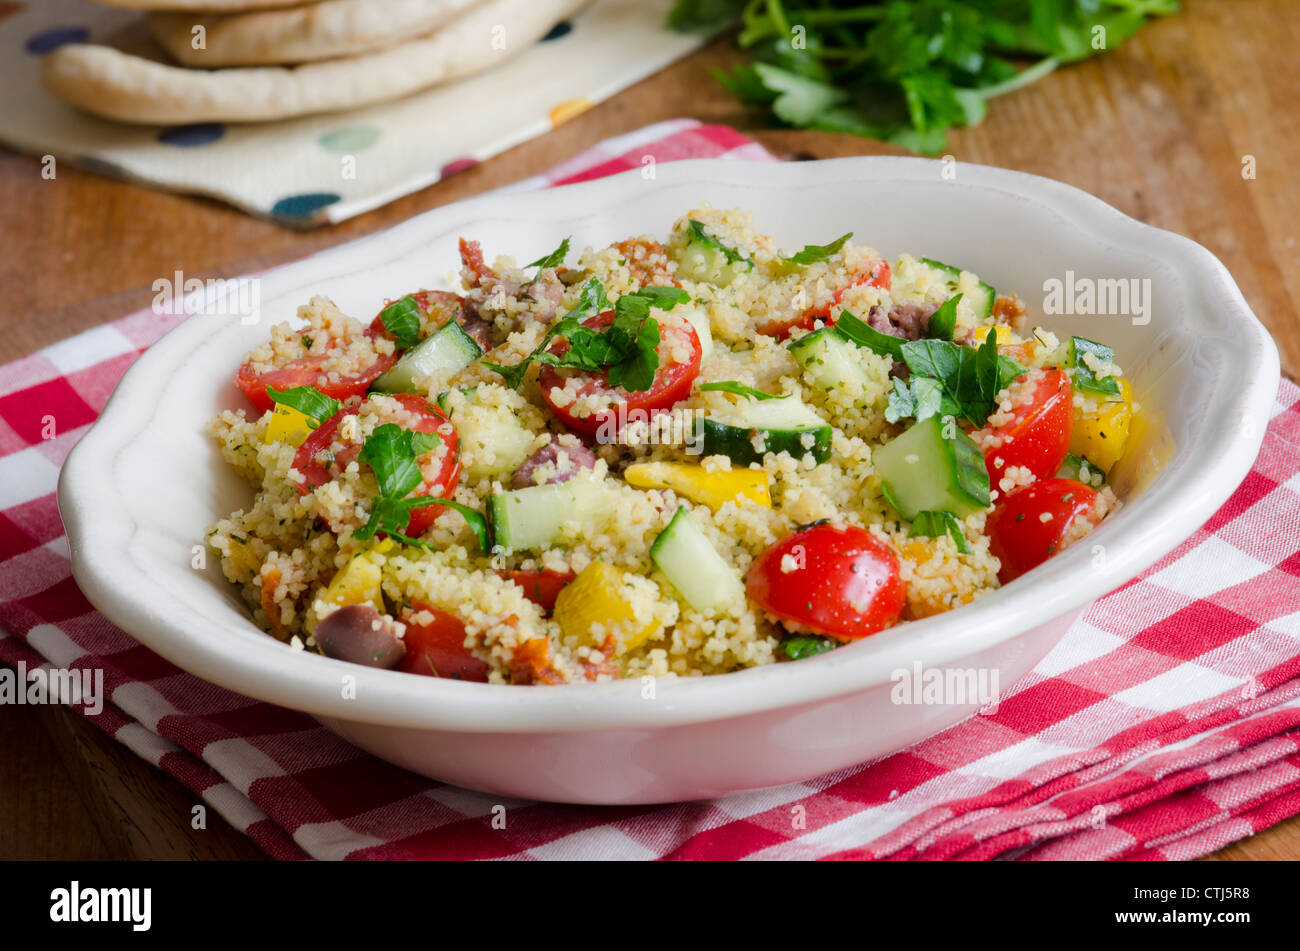 Moroccan couscous with vegetables Stock Photo